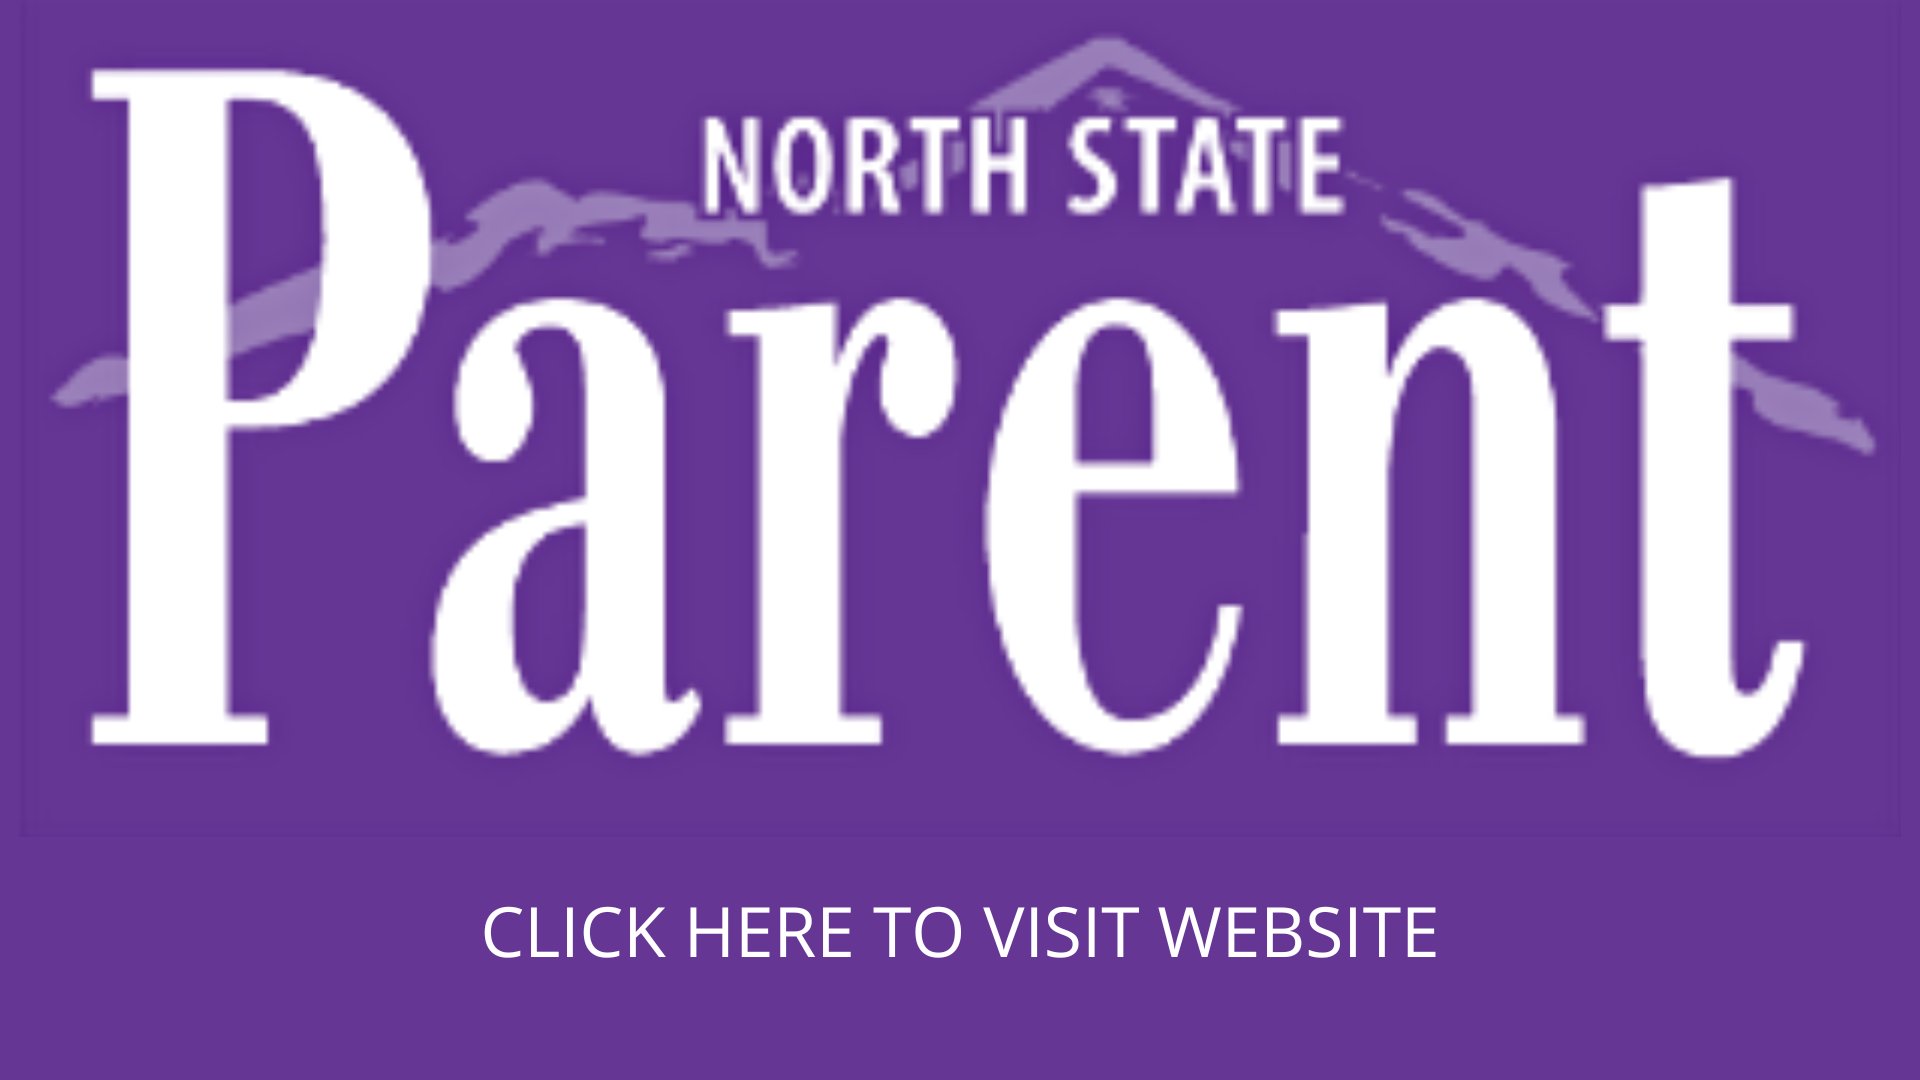 North state parent click here to visit website